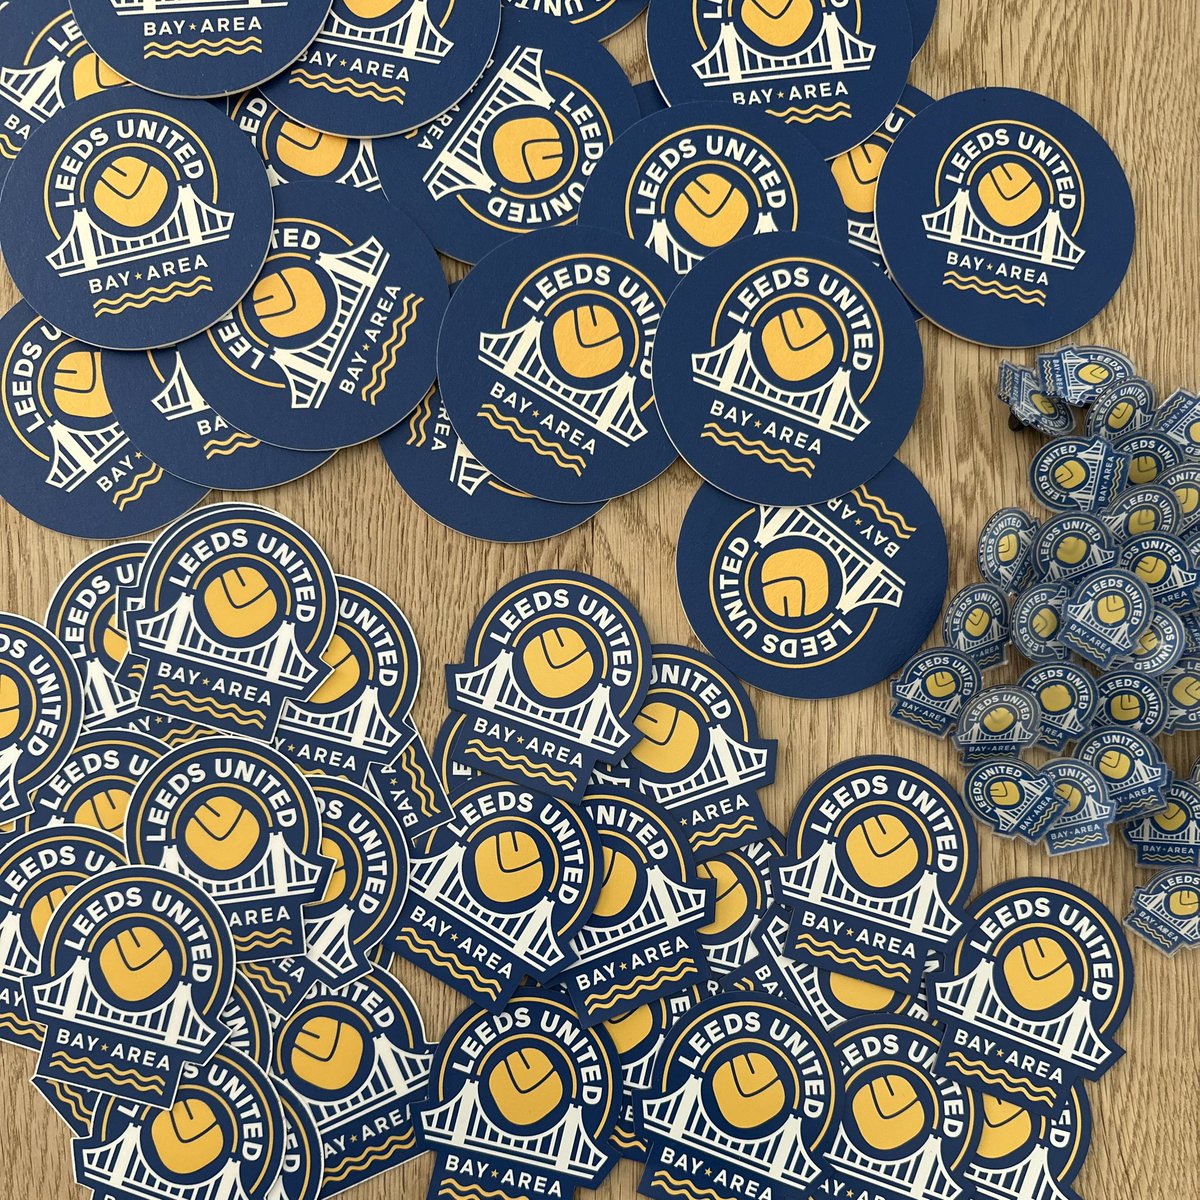 FREE STUFF! Anyone coming to our meetup tomorrow can help themselves to fridge magnets, stickers, pins and coasters. They’ll be on the tables. MOT